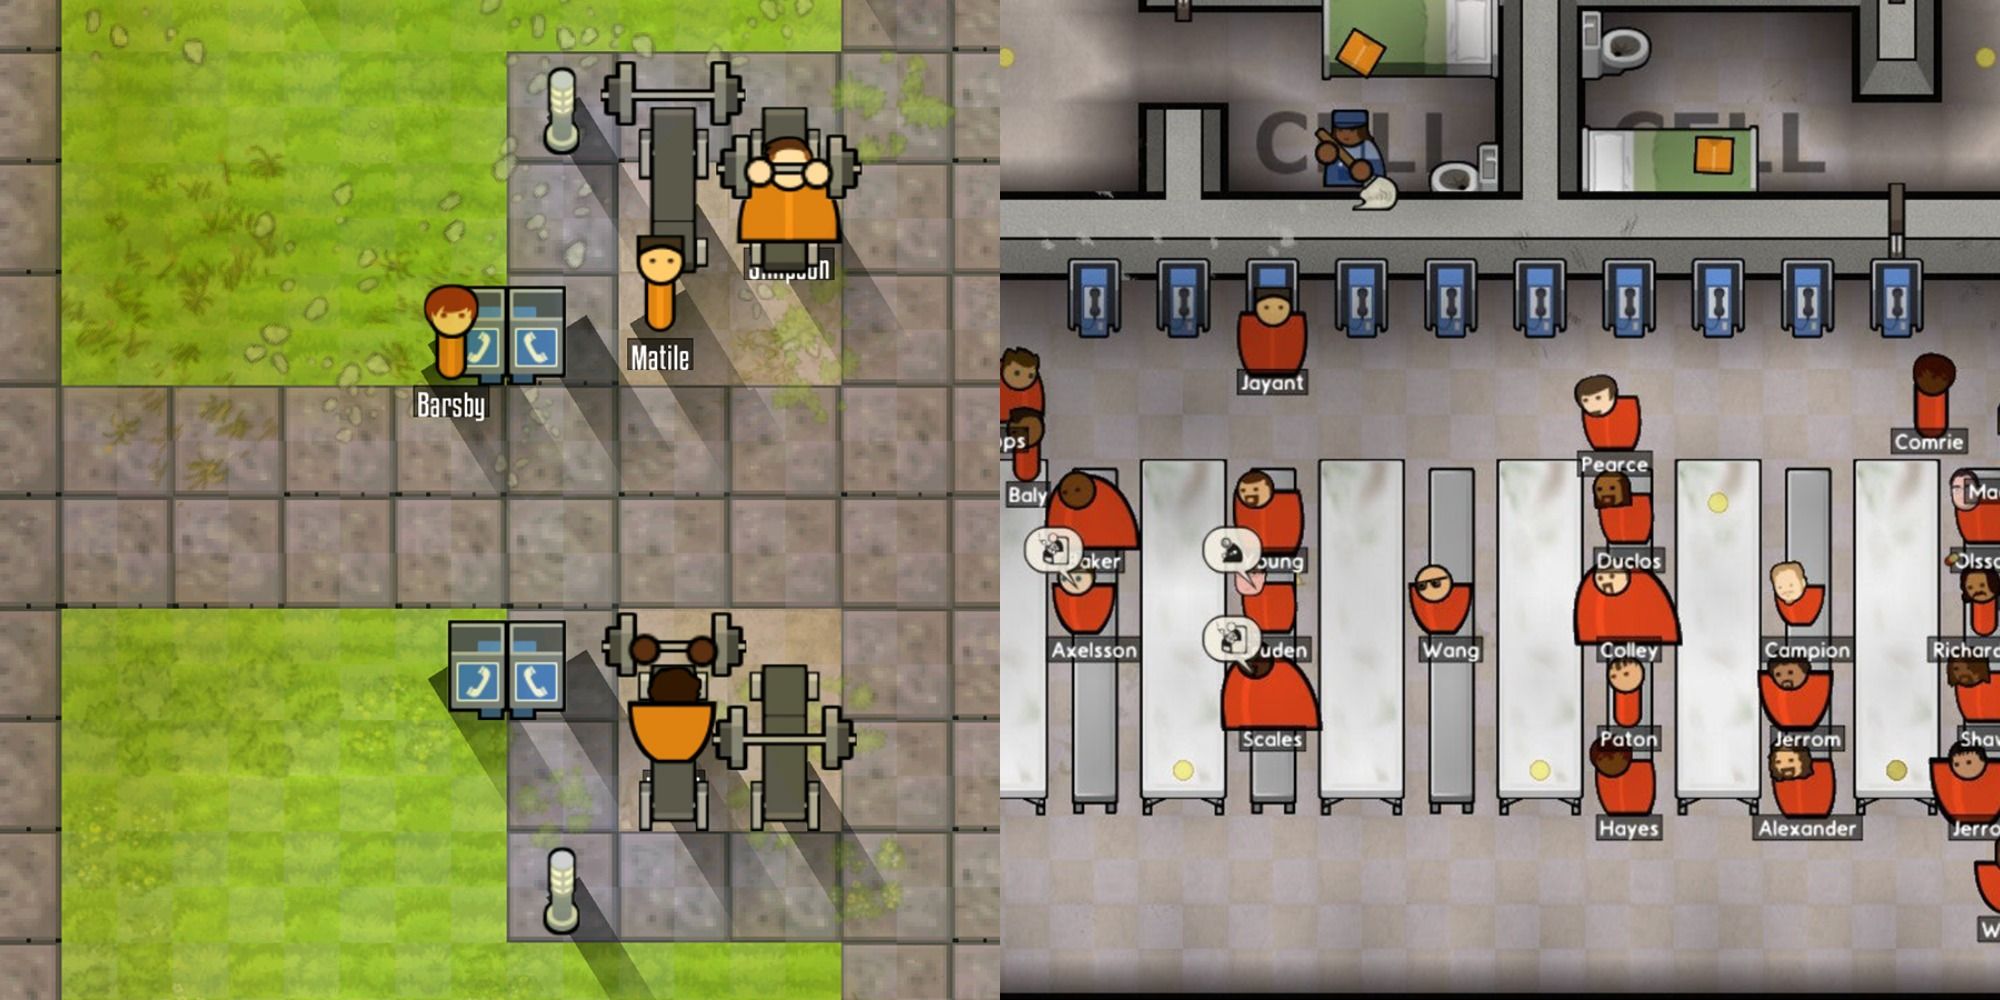 tips on building a prison architect layout